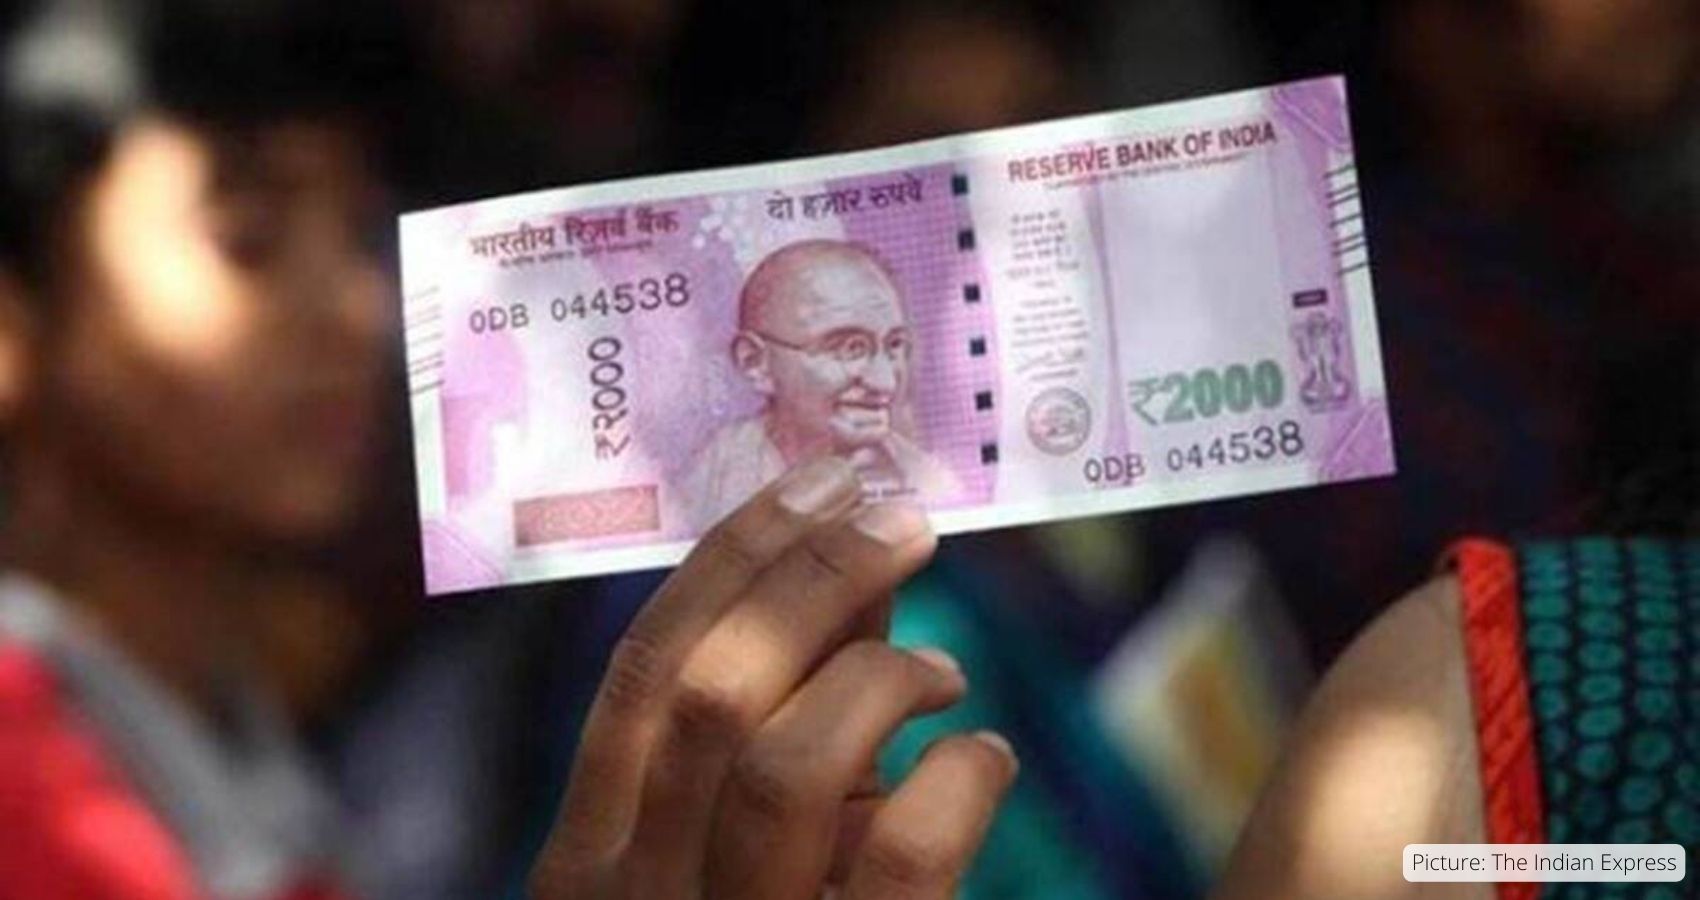 India Phases Out ₹2,000 Notes, Sets September 30 Deadline for Exchange